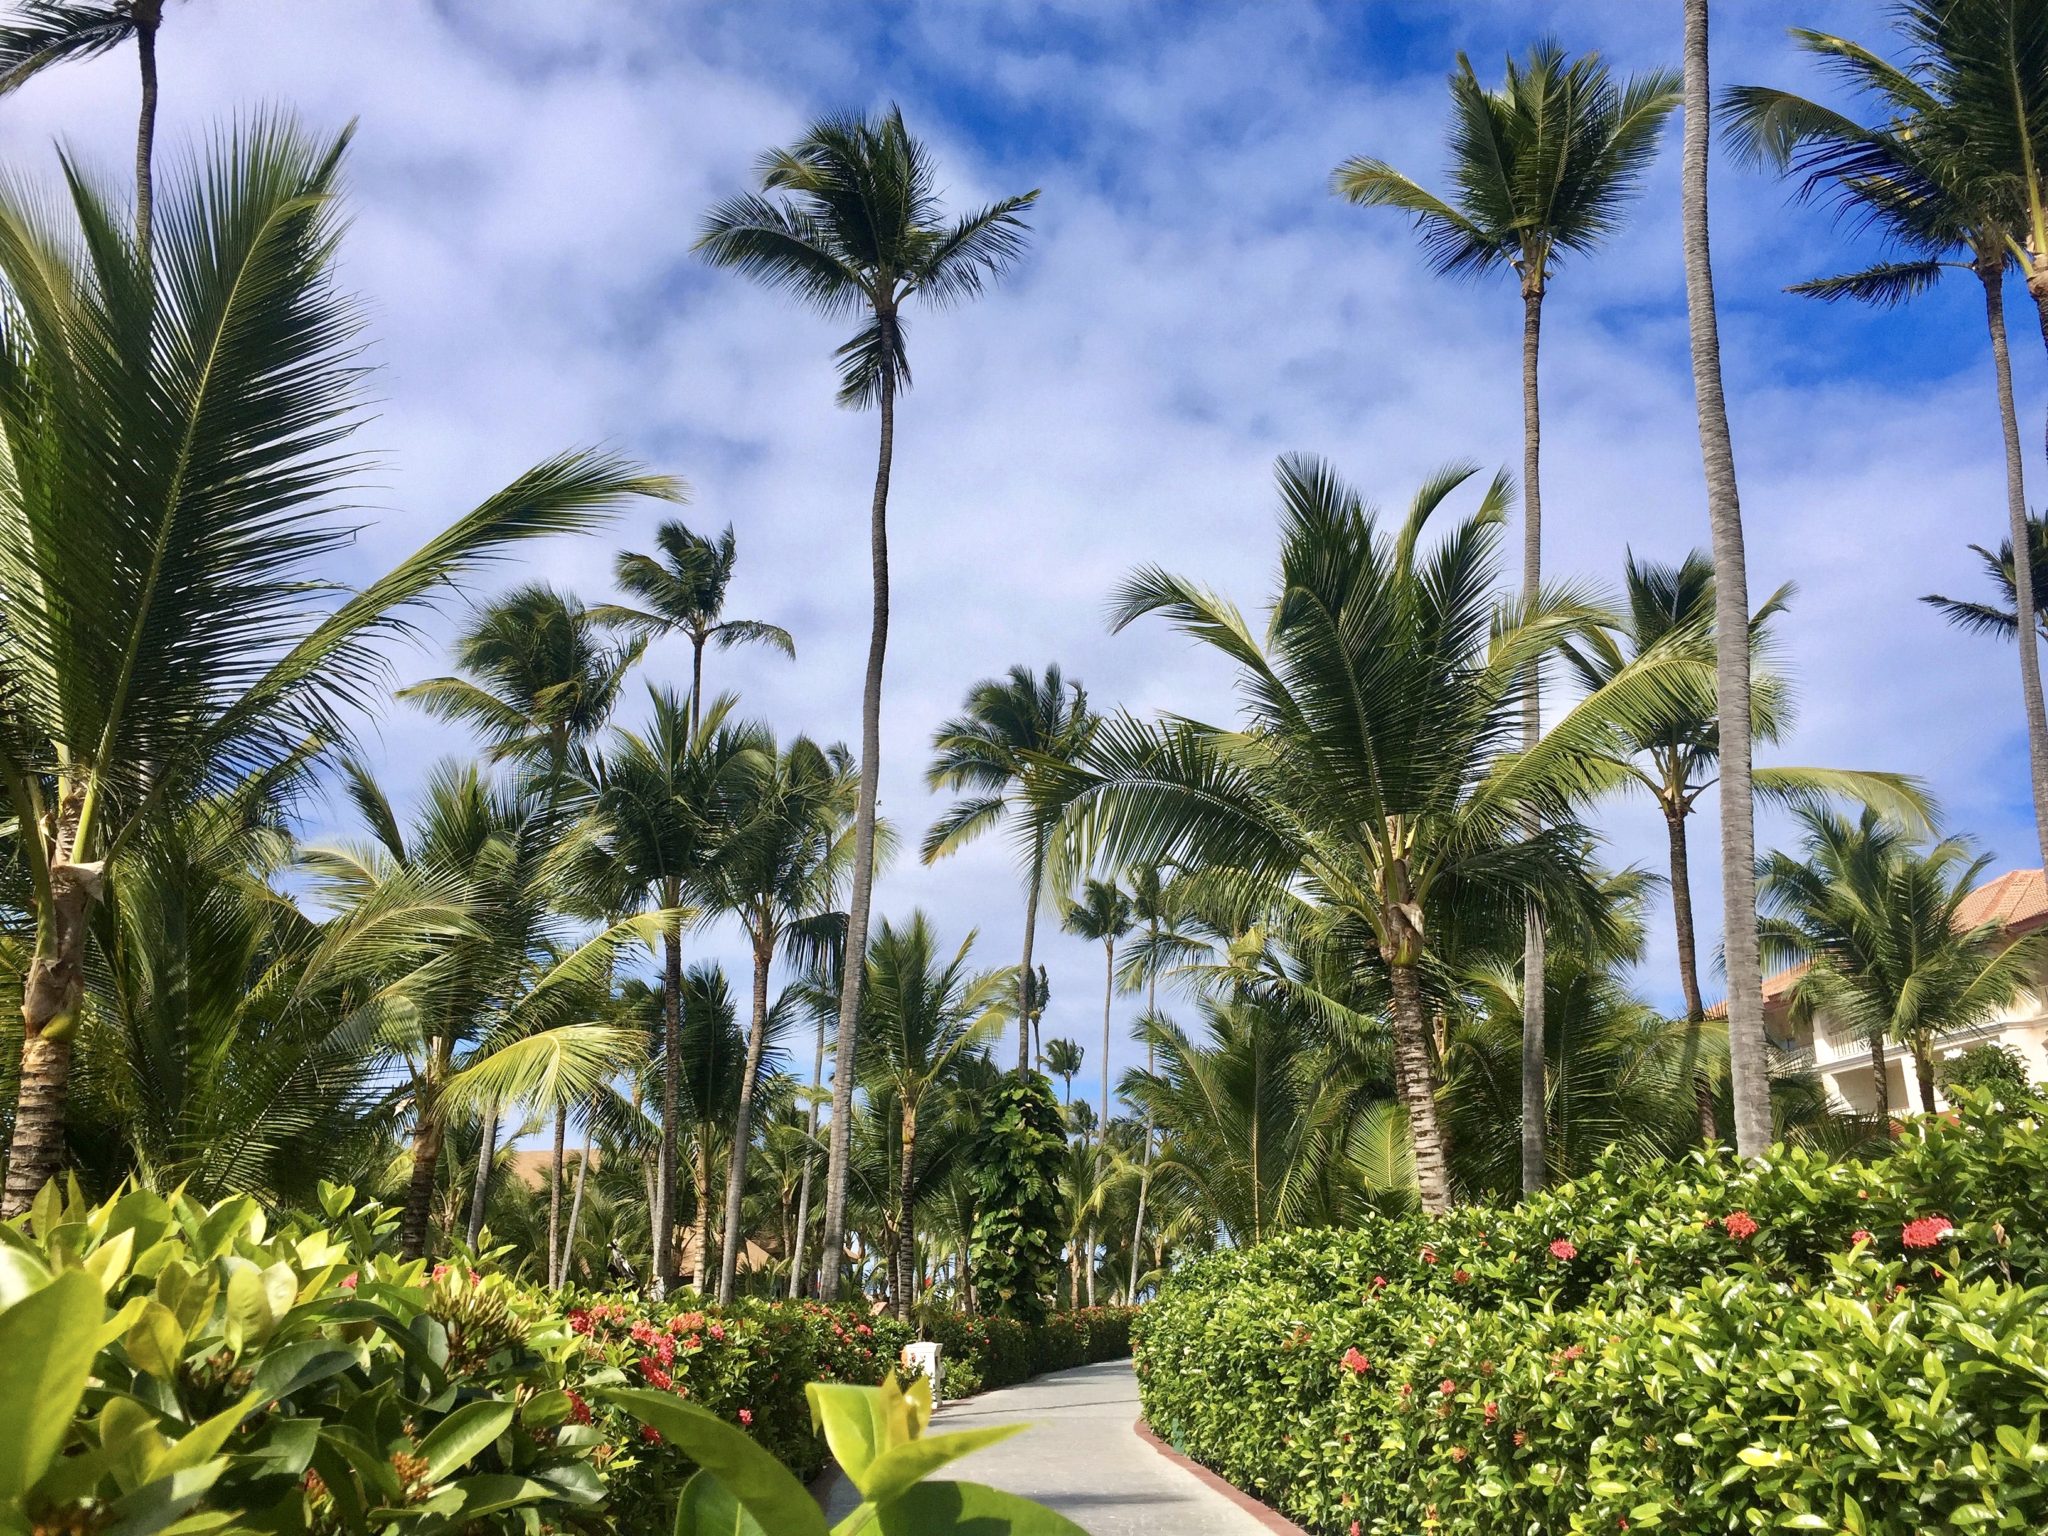 Resort grounds at Majestic Colonial Punta Cana